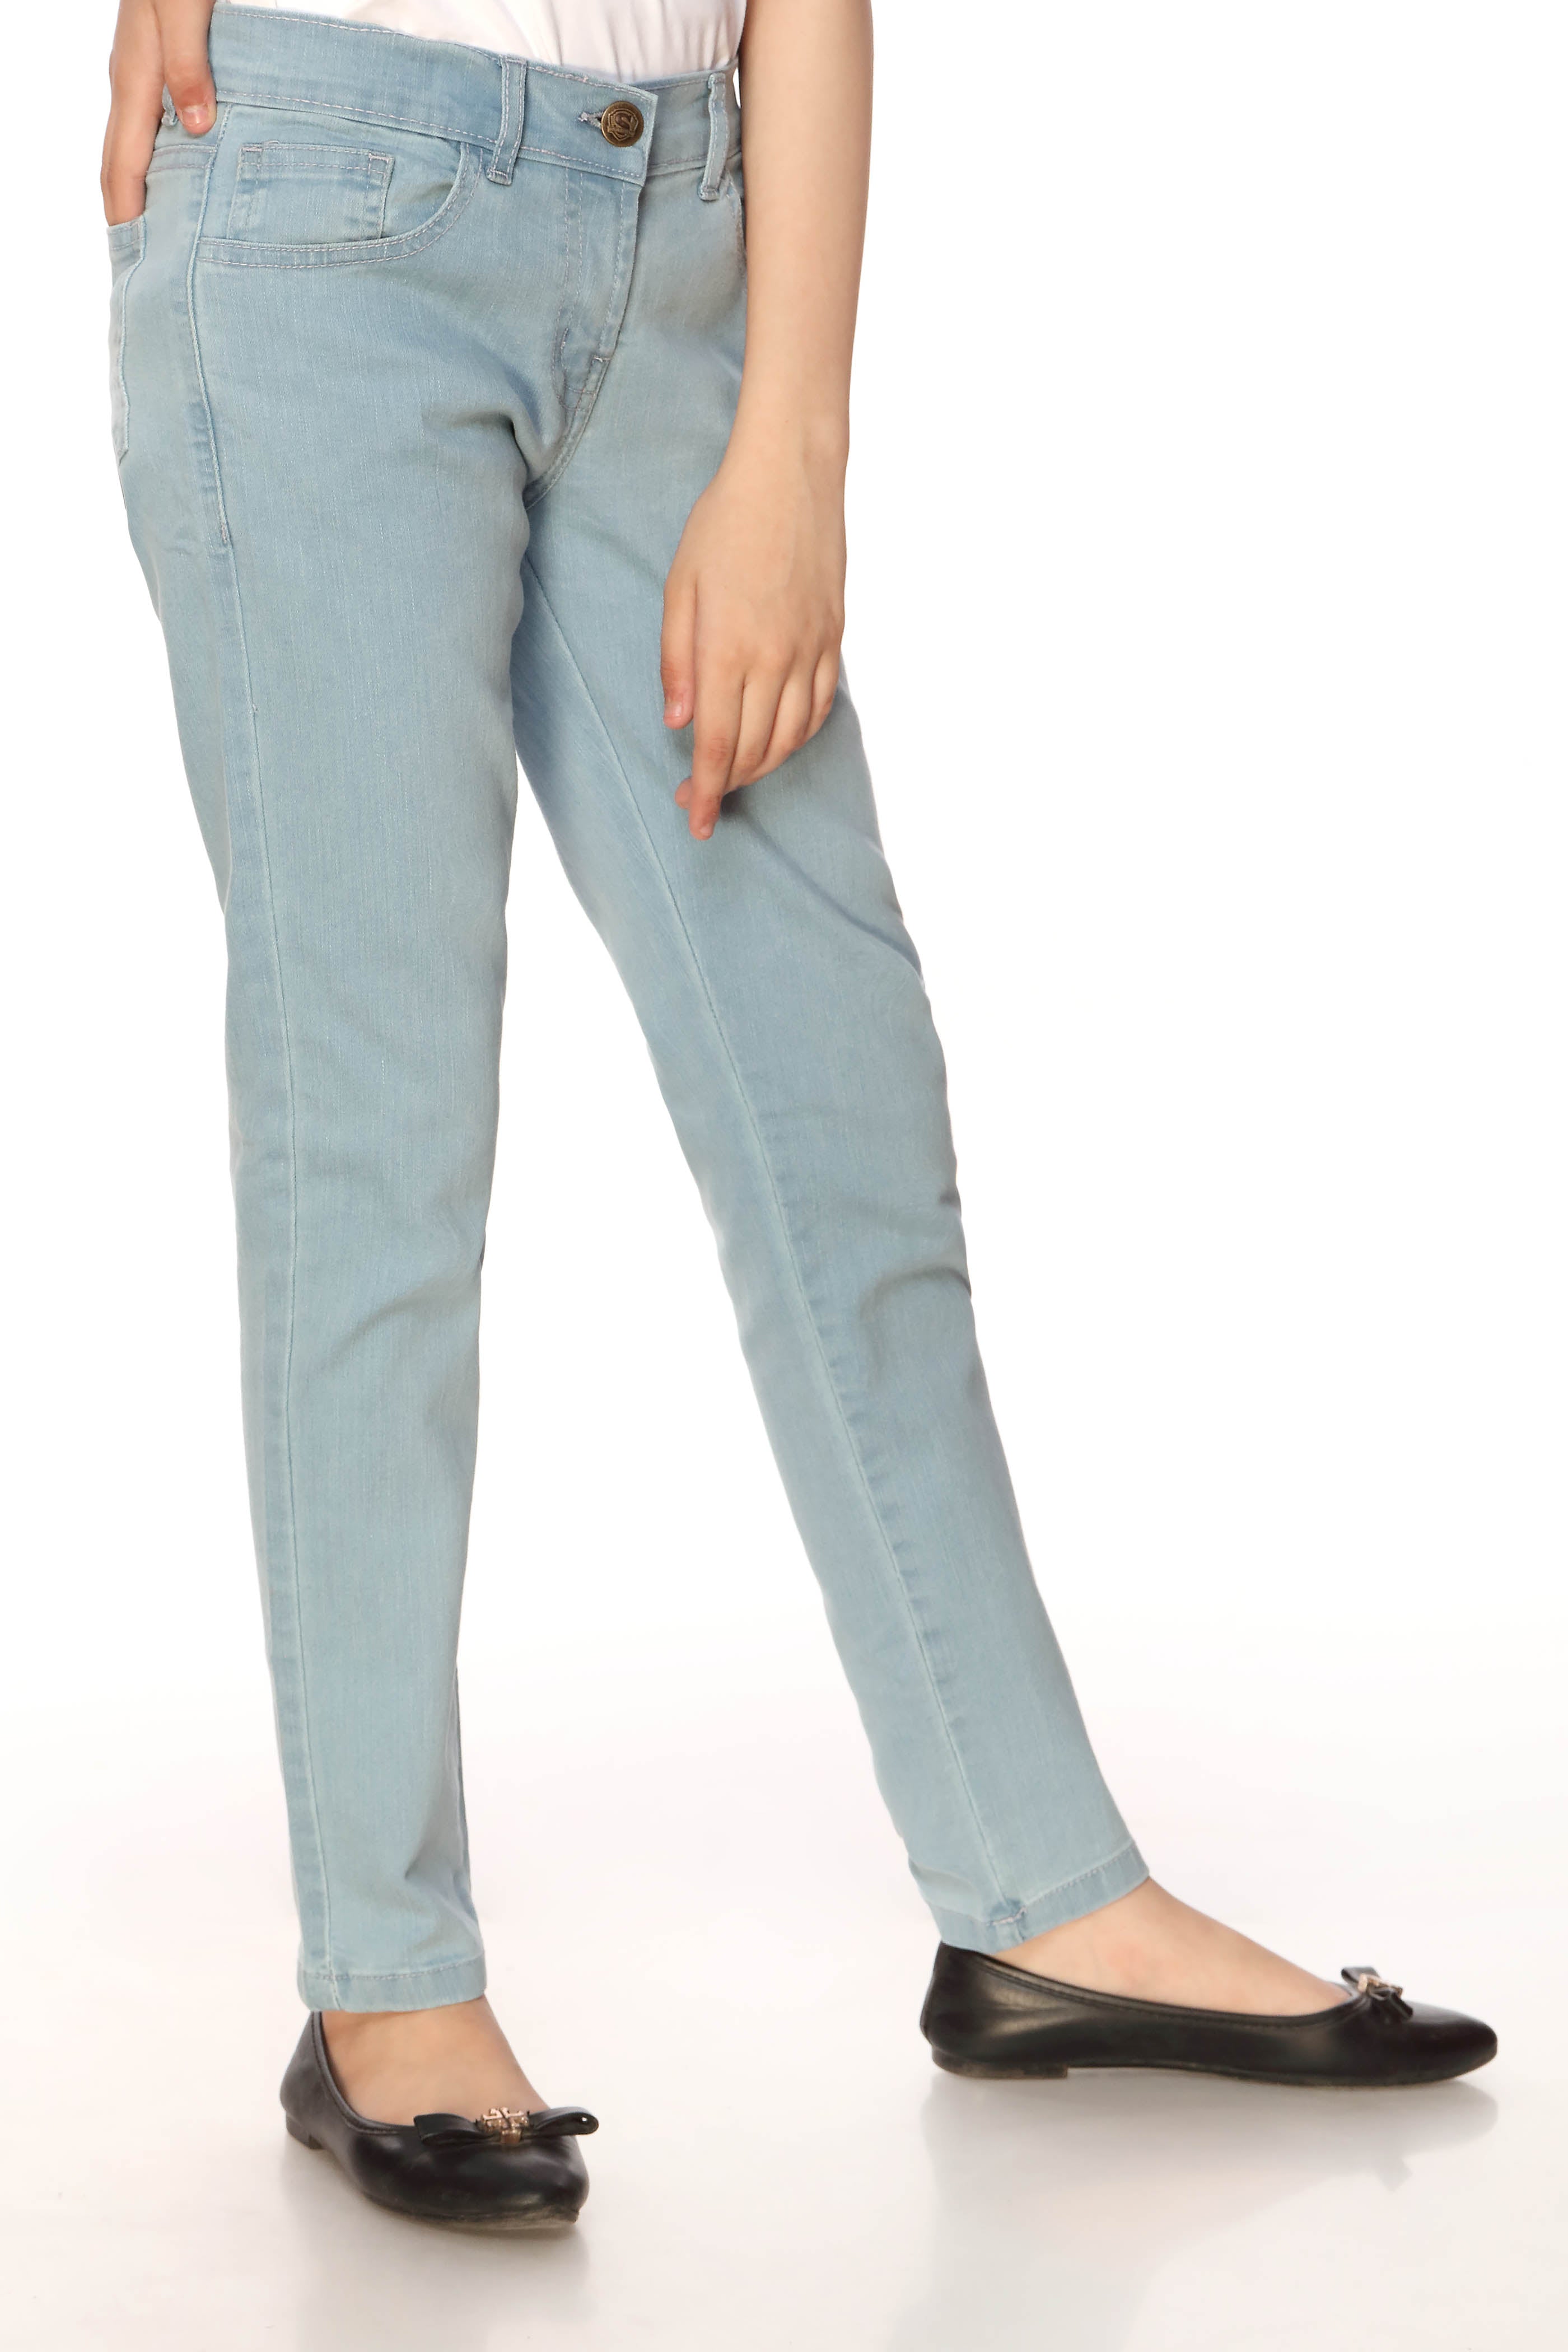 EMBROIDERED SKINNY PANTS (SSGD-127)